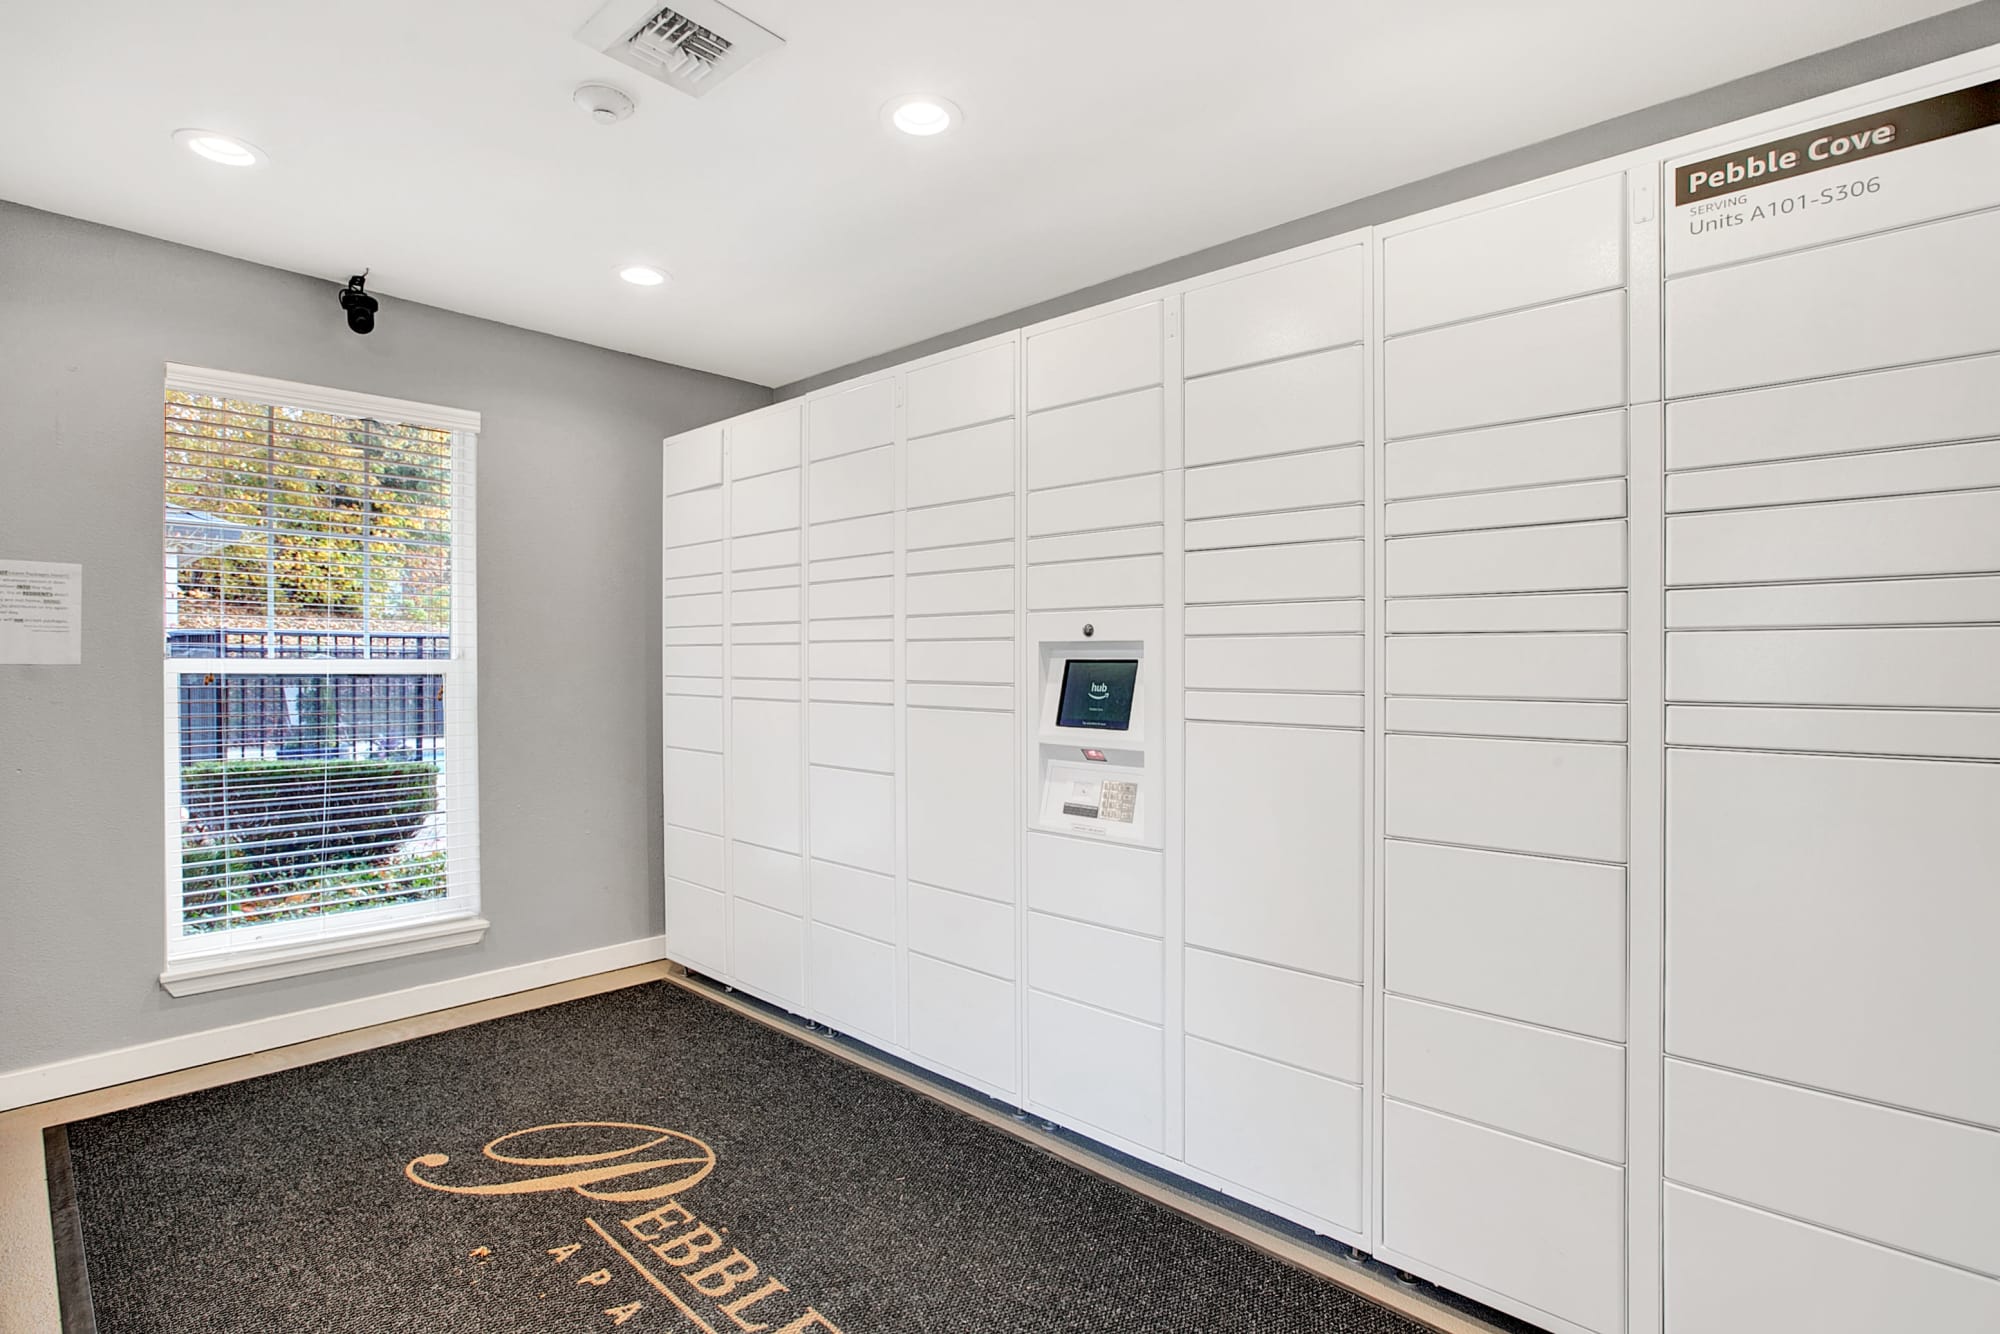 24-hour package lockers with Amazon HUB at Pebble Cove Apartments in Renton, Washington